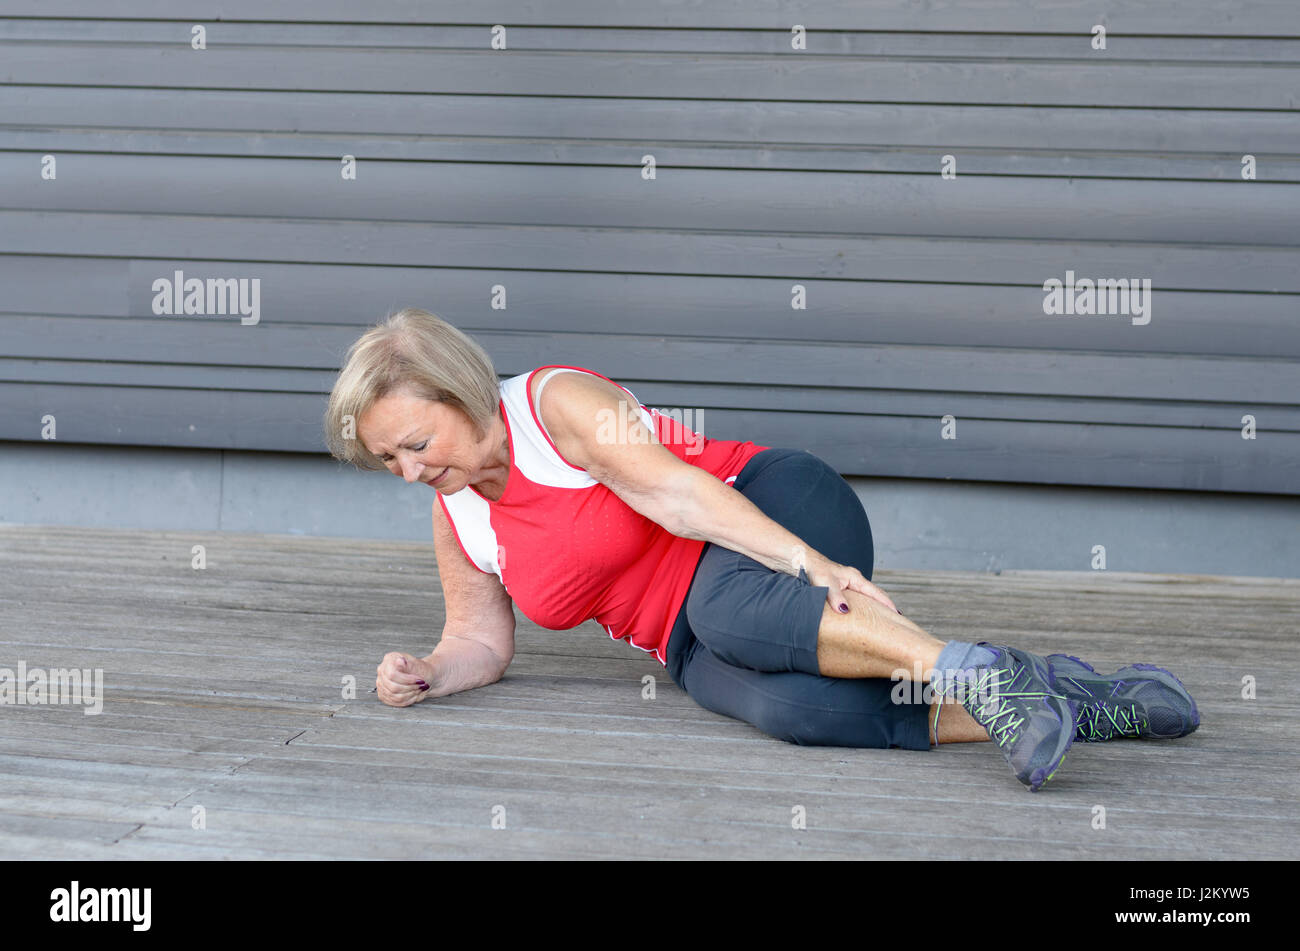 Senior woman with severe muscle cramps in her calf clutching her lower leg in pain as she lies on the floor during a sports workout Stock Photo